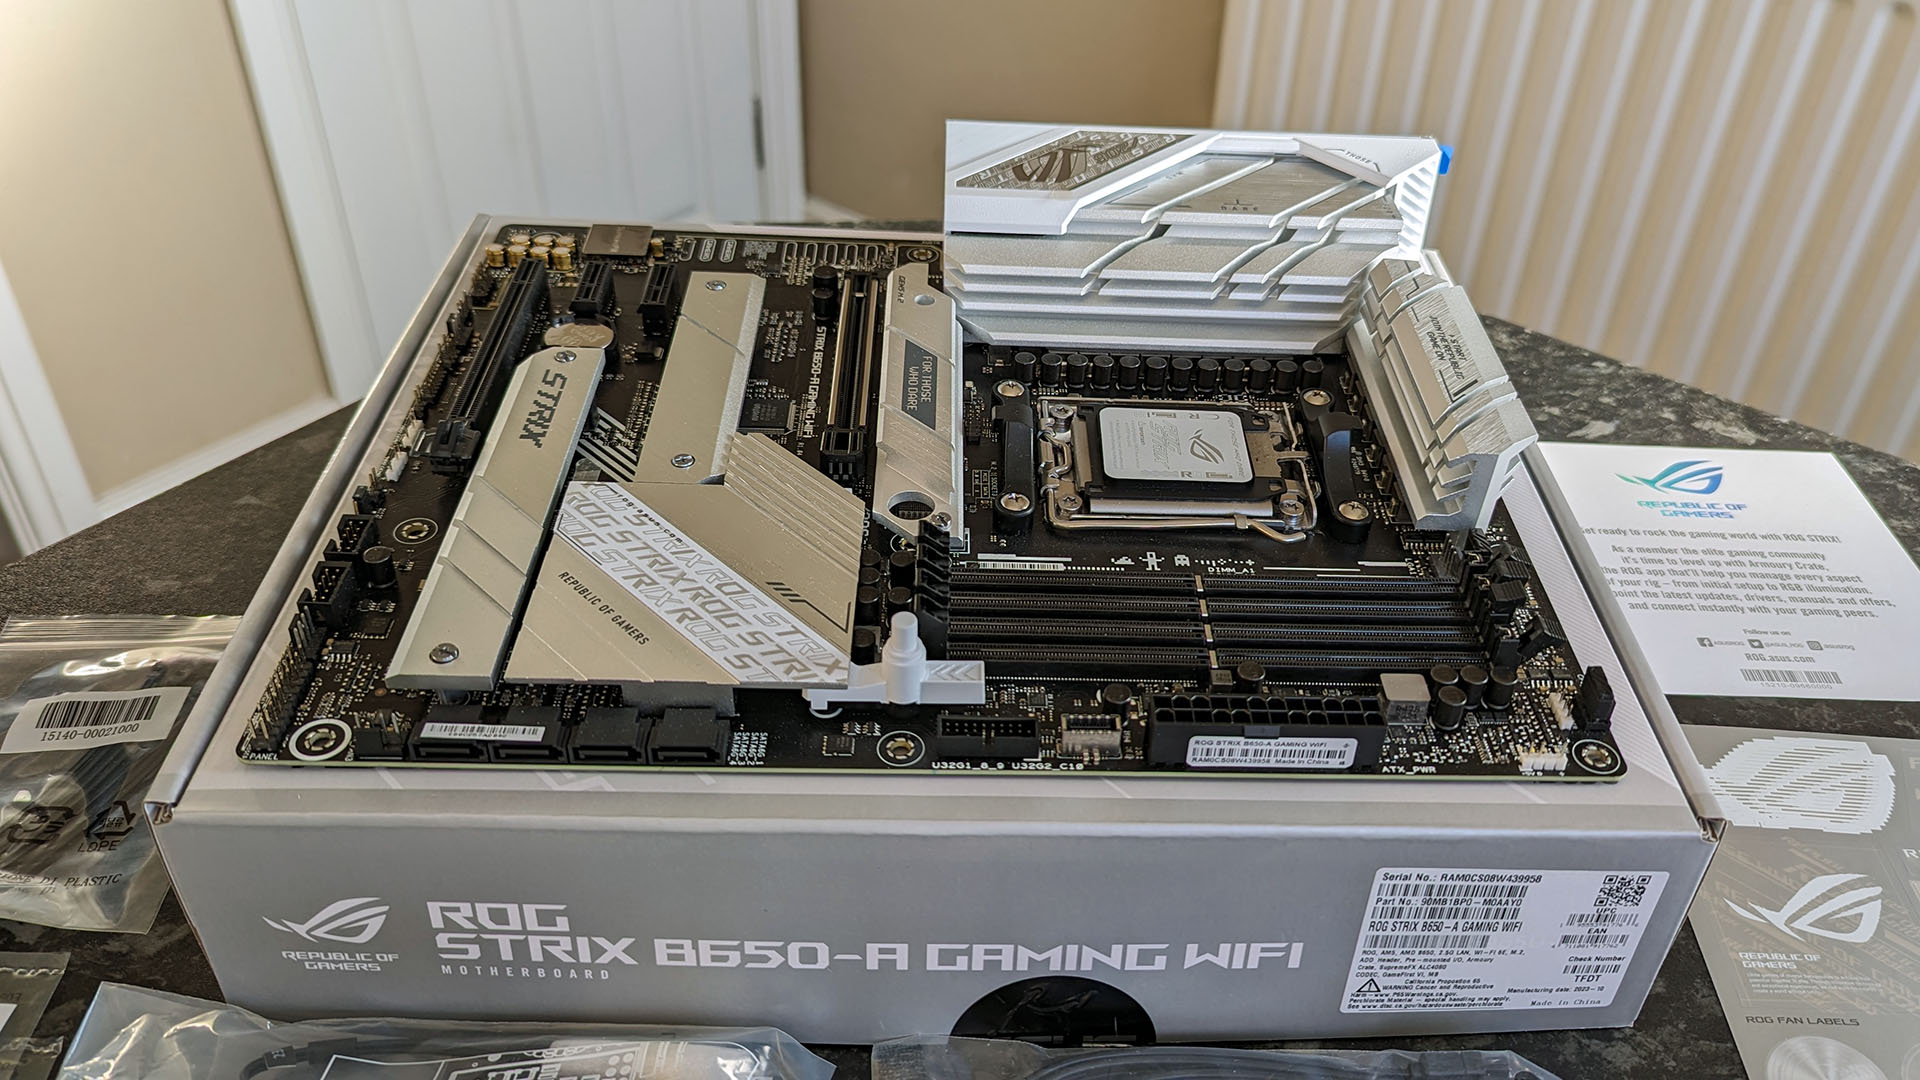 ASUS ROG STRIX B650-A Gaming Wifi motherboard seated on top of its retail packaging with accessories unboxed